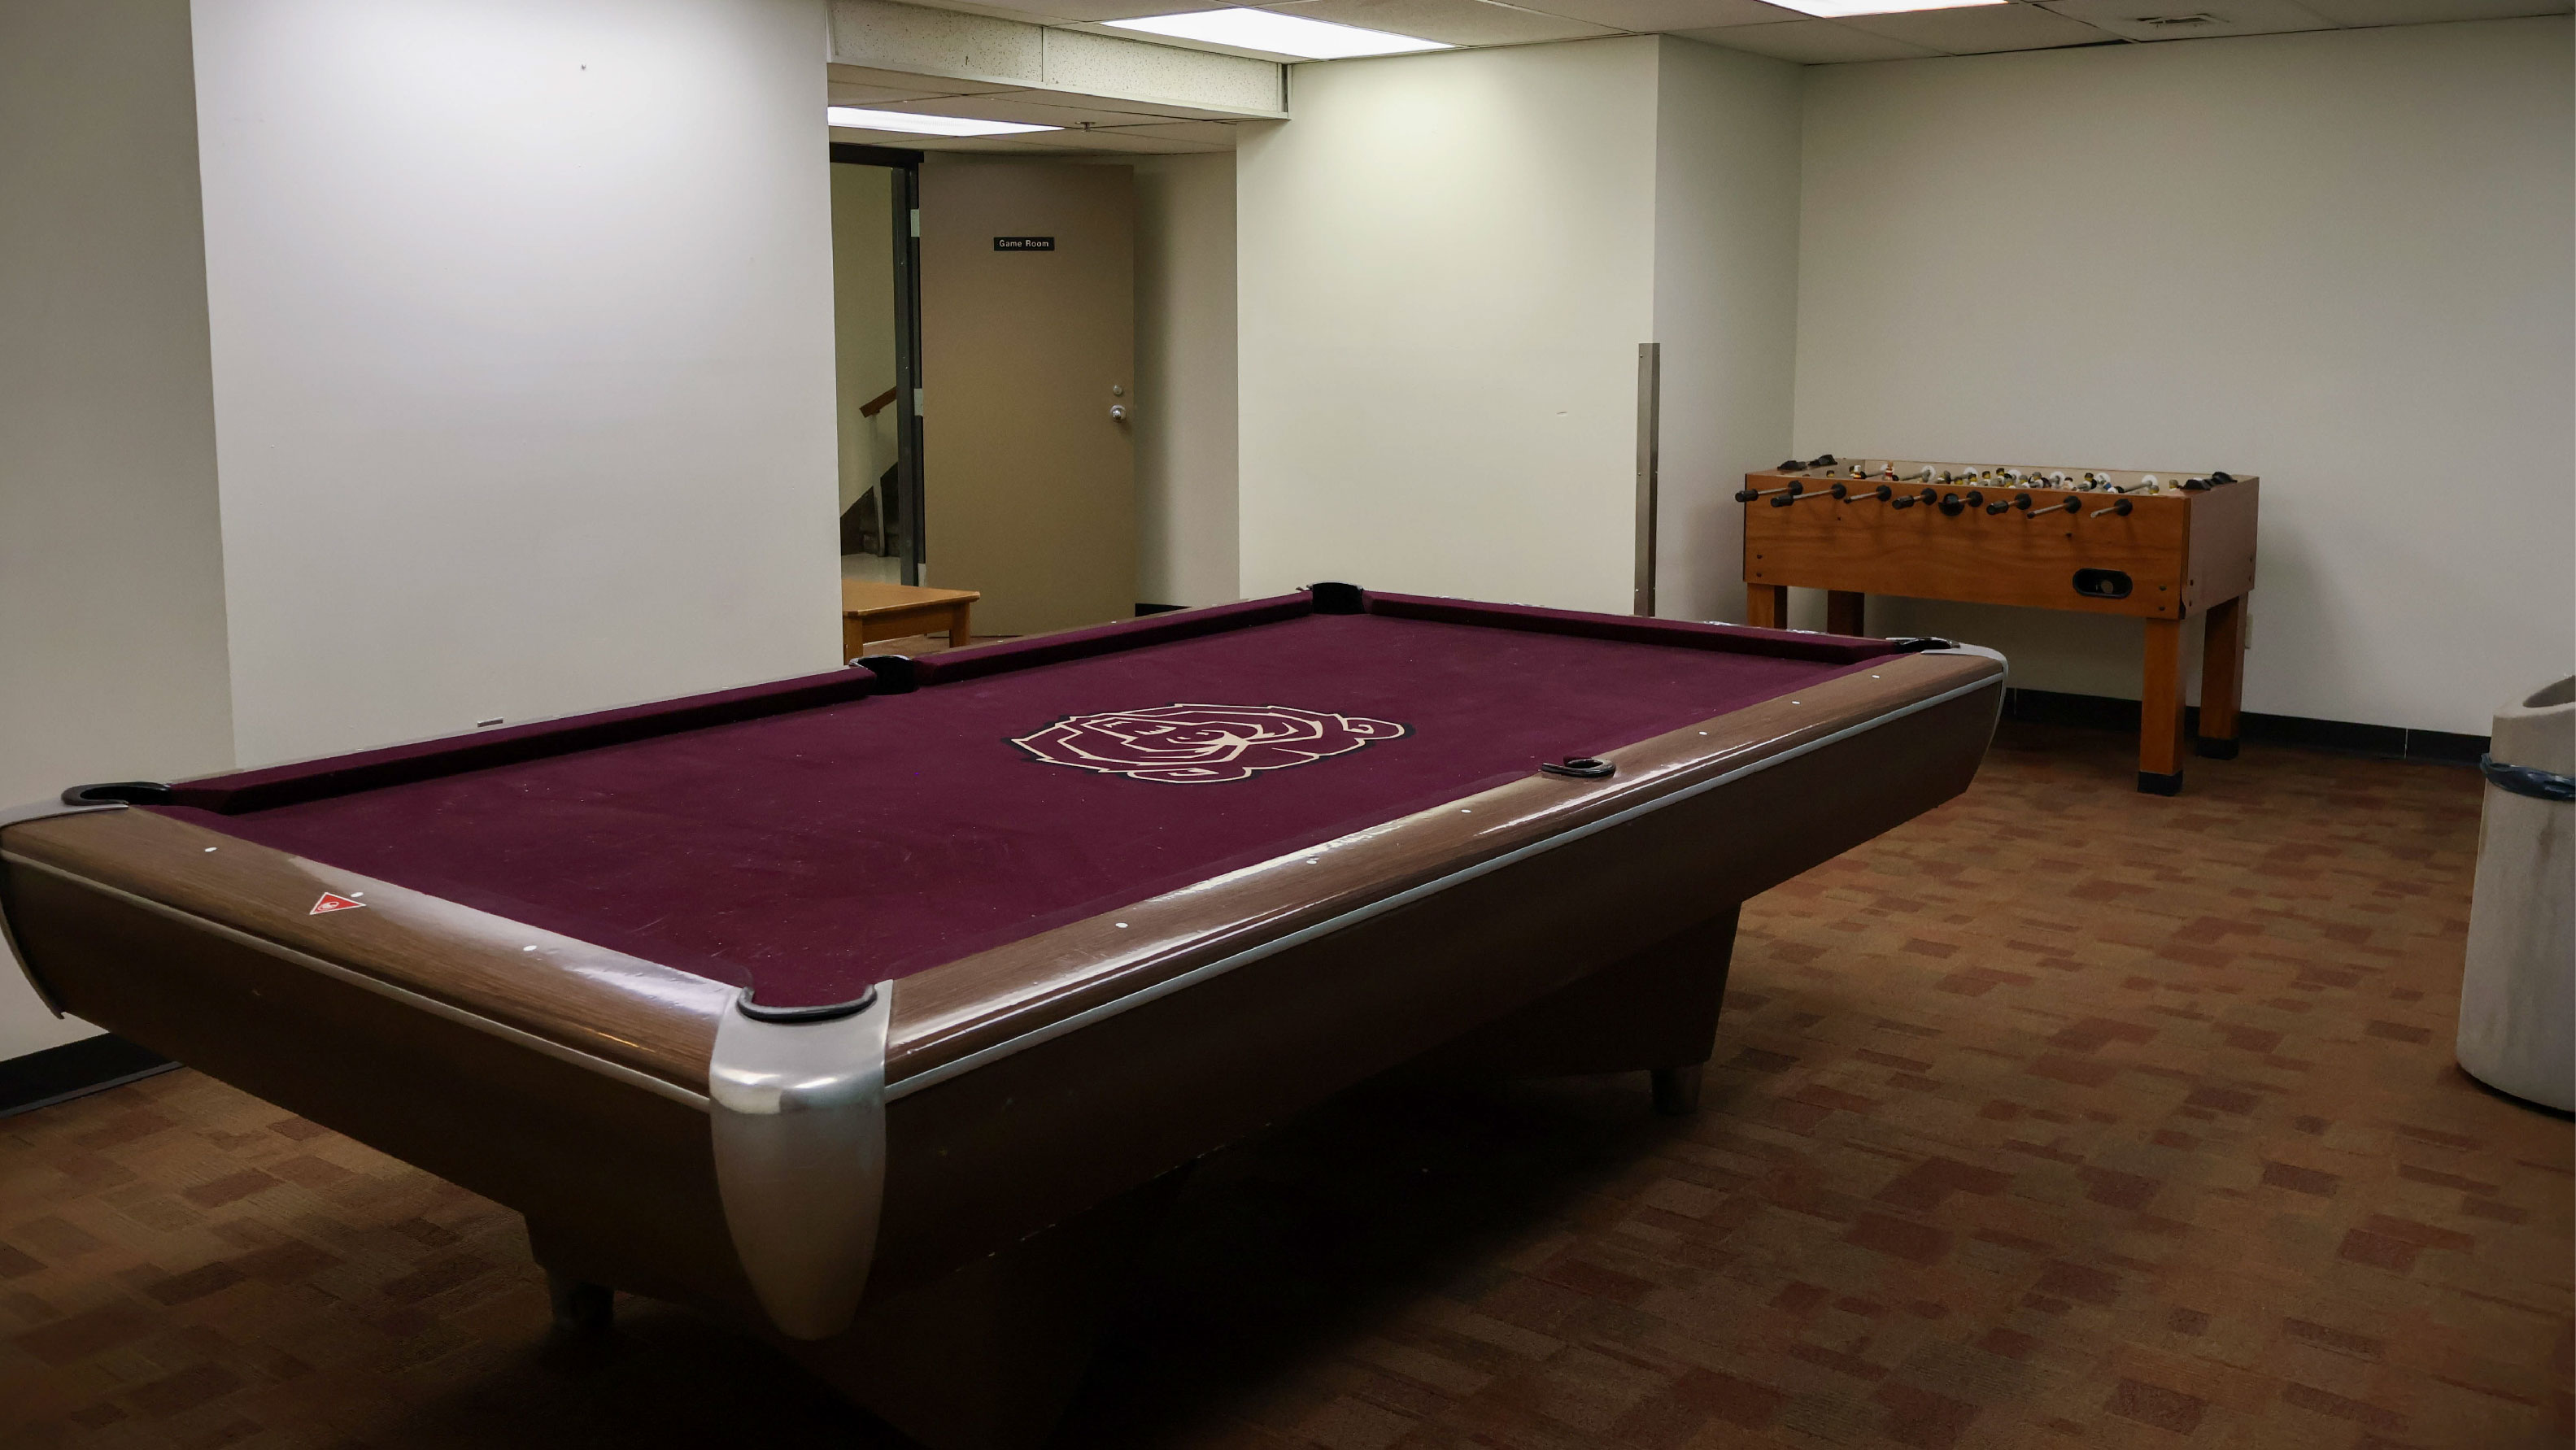 Room with pool table and football table